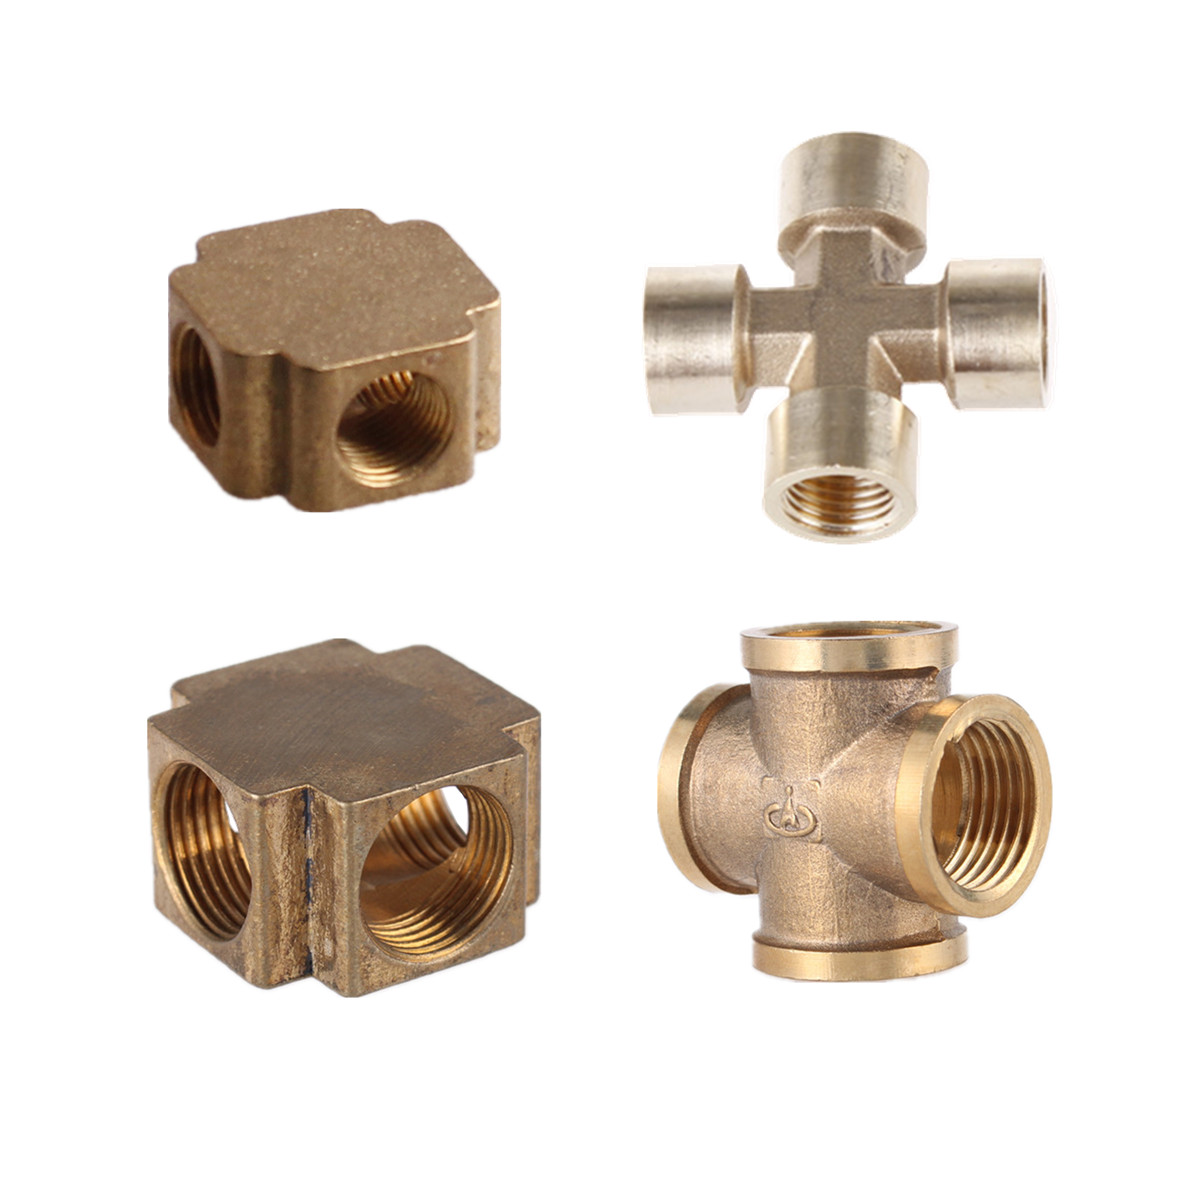 4 Way Cross BSP 1/4" Female Thread Brass Connector Fitting Pipe Adapter Thick 